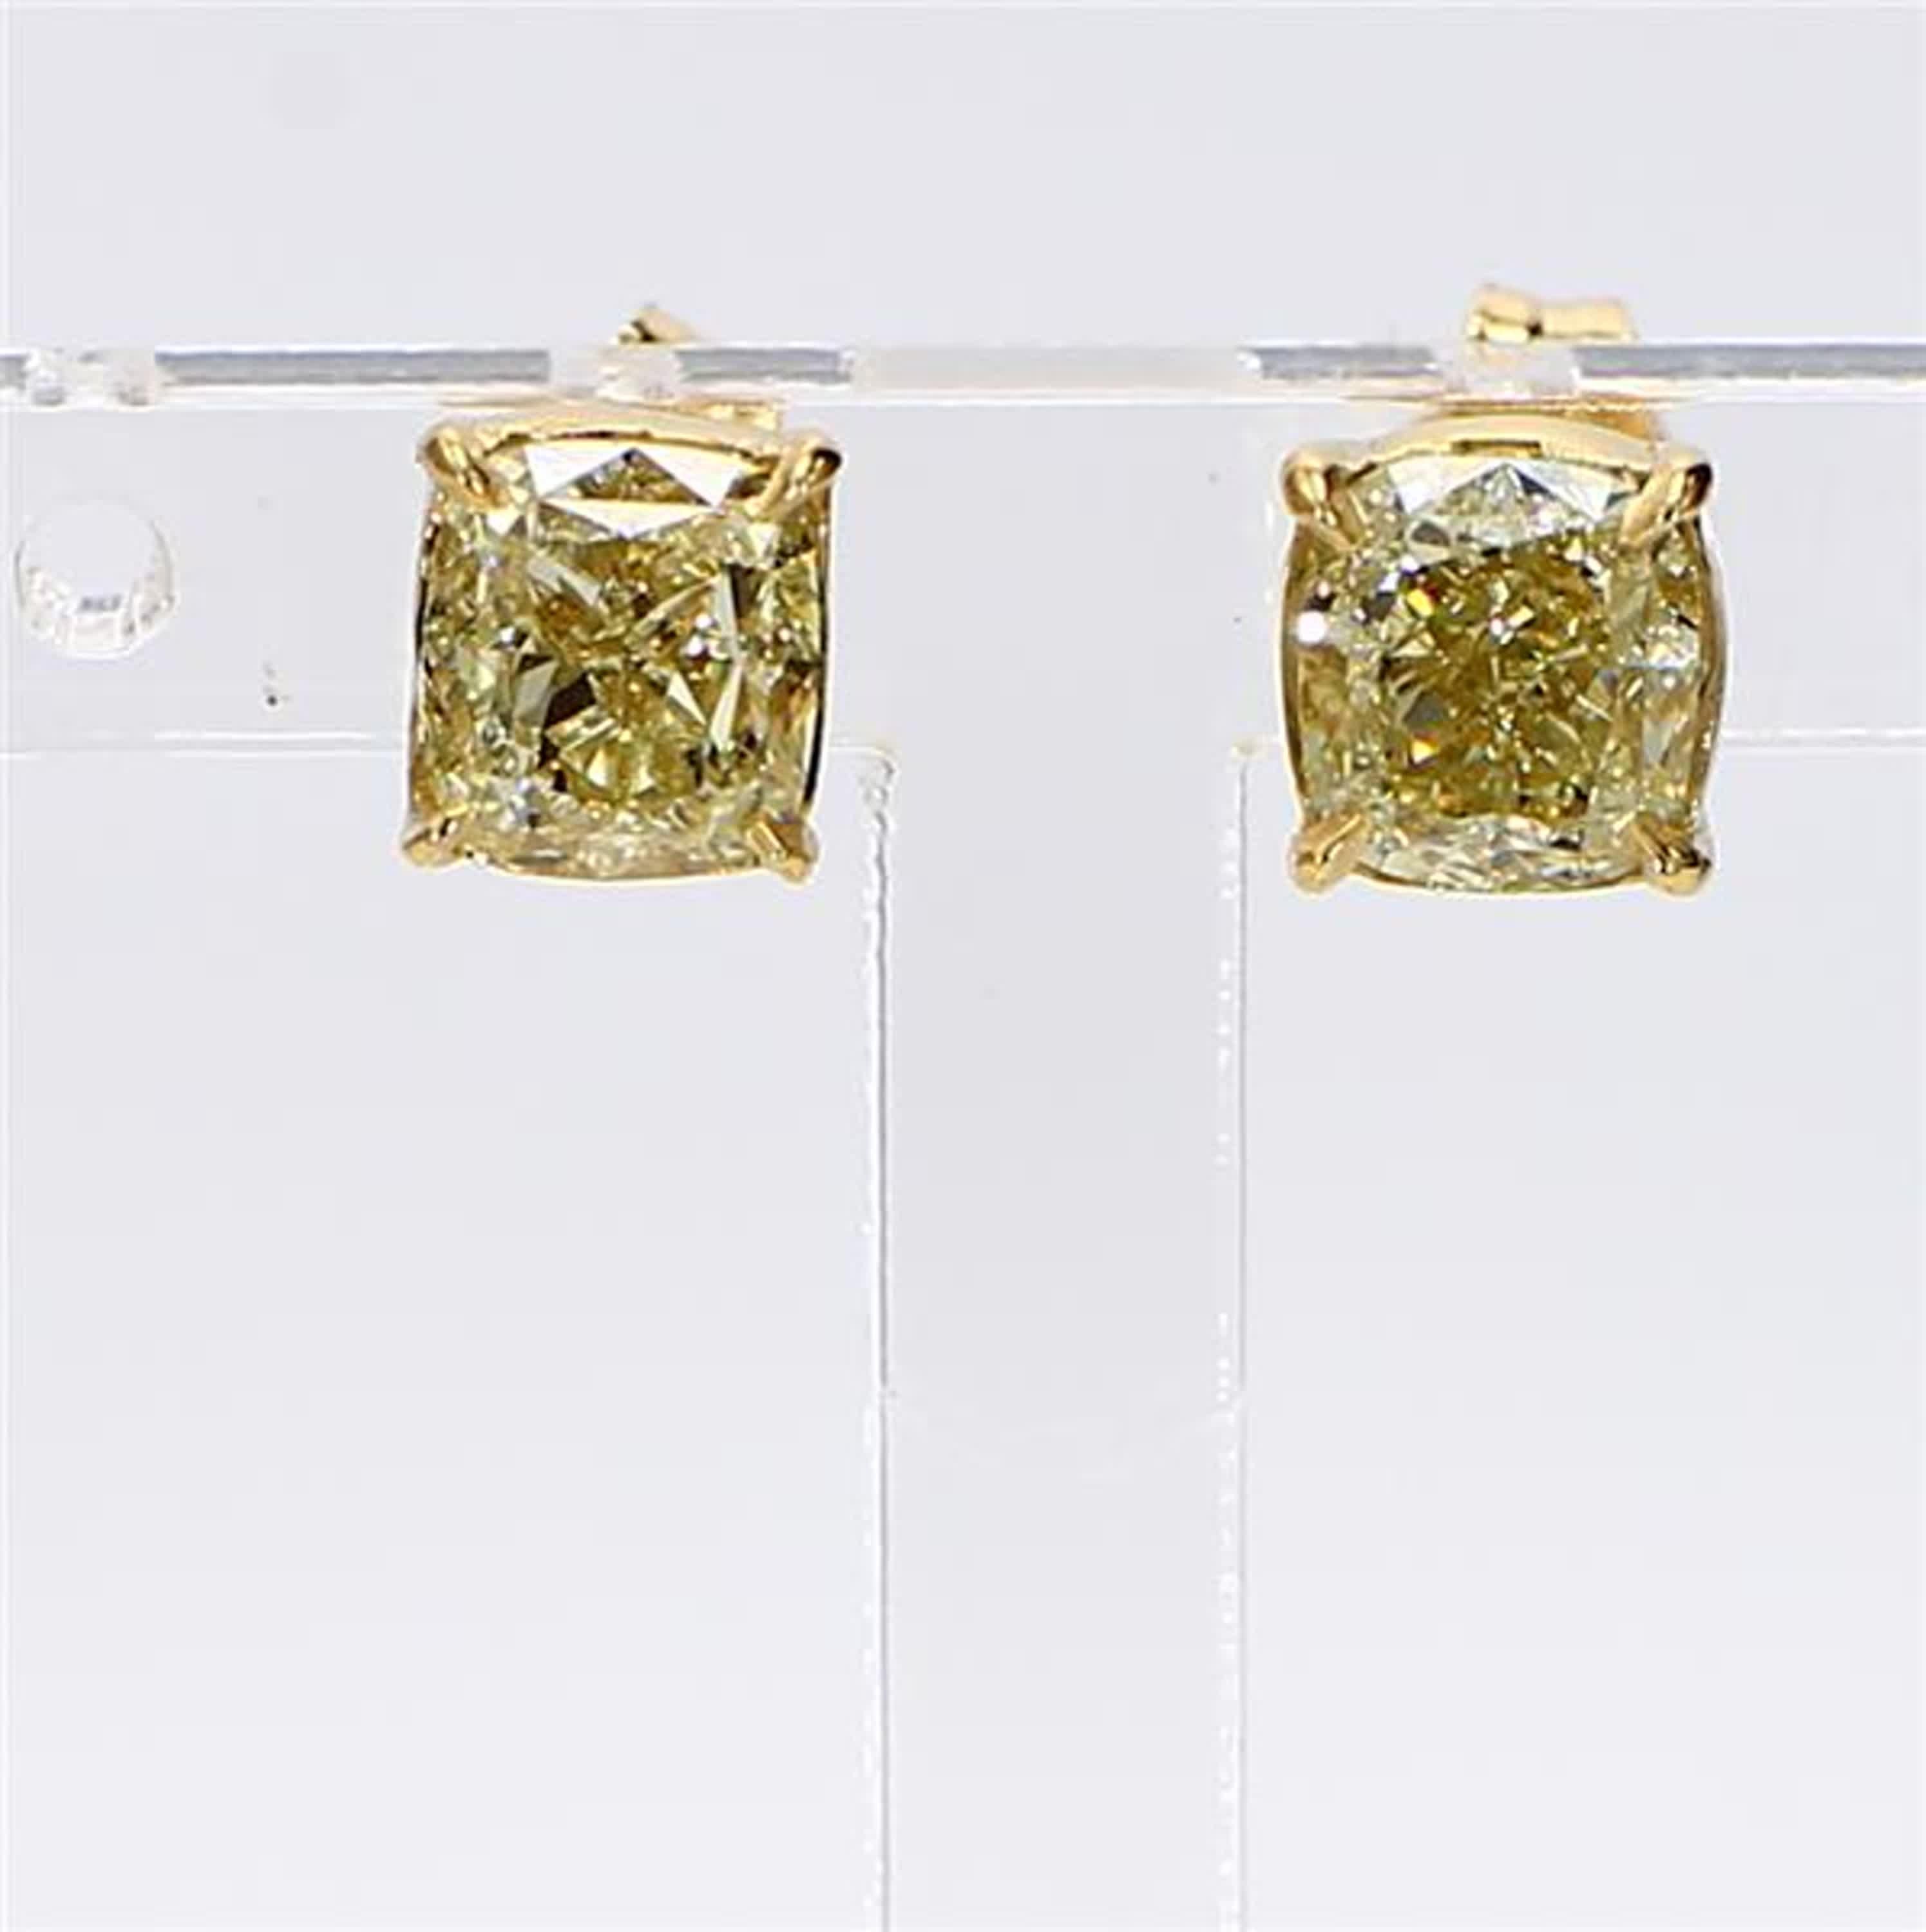 RareGemWorld's classic diamond earrings. Mounted in a beautiful 18K Yellow Gold setting with natural cushion cut yellow diamonds. These earrings are guaranteed to impress and enhance your personal collection!

Total Weight: 1.81cts

Diamond